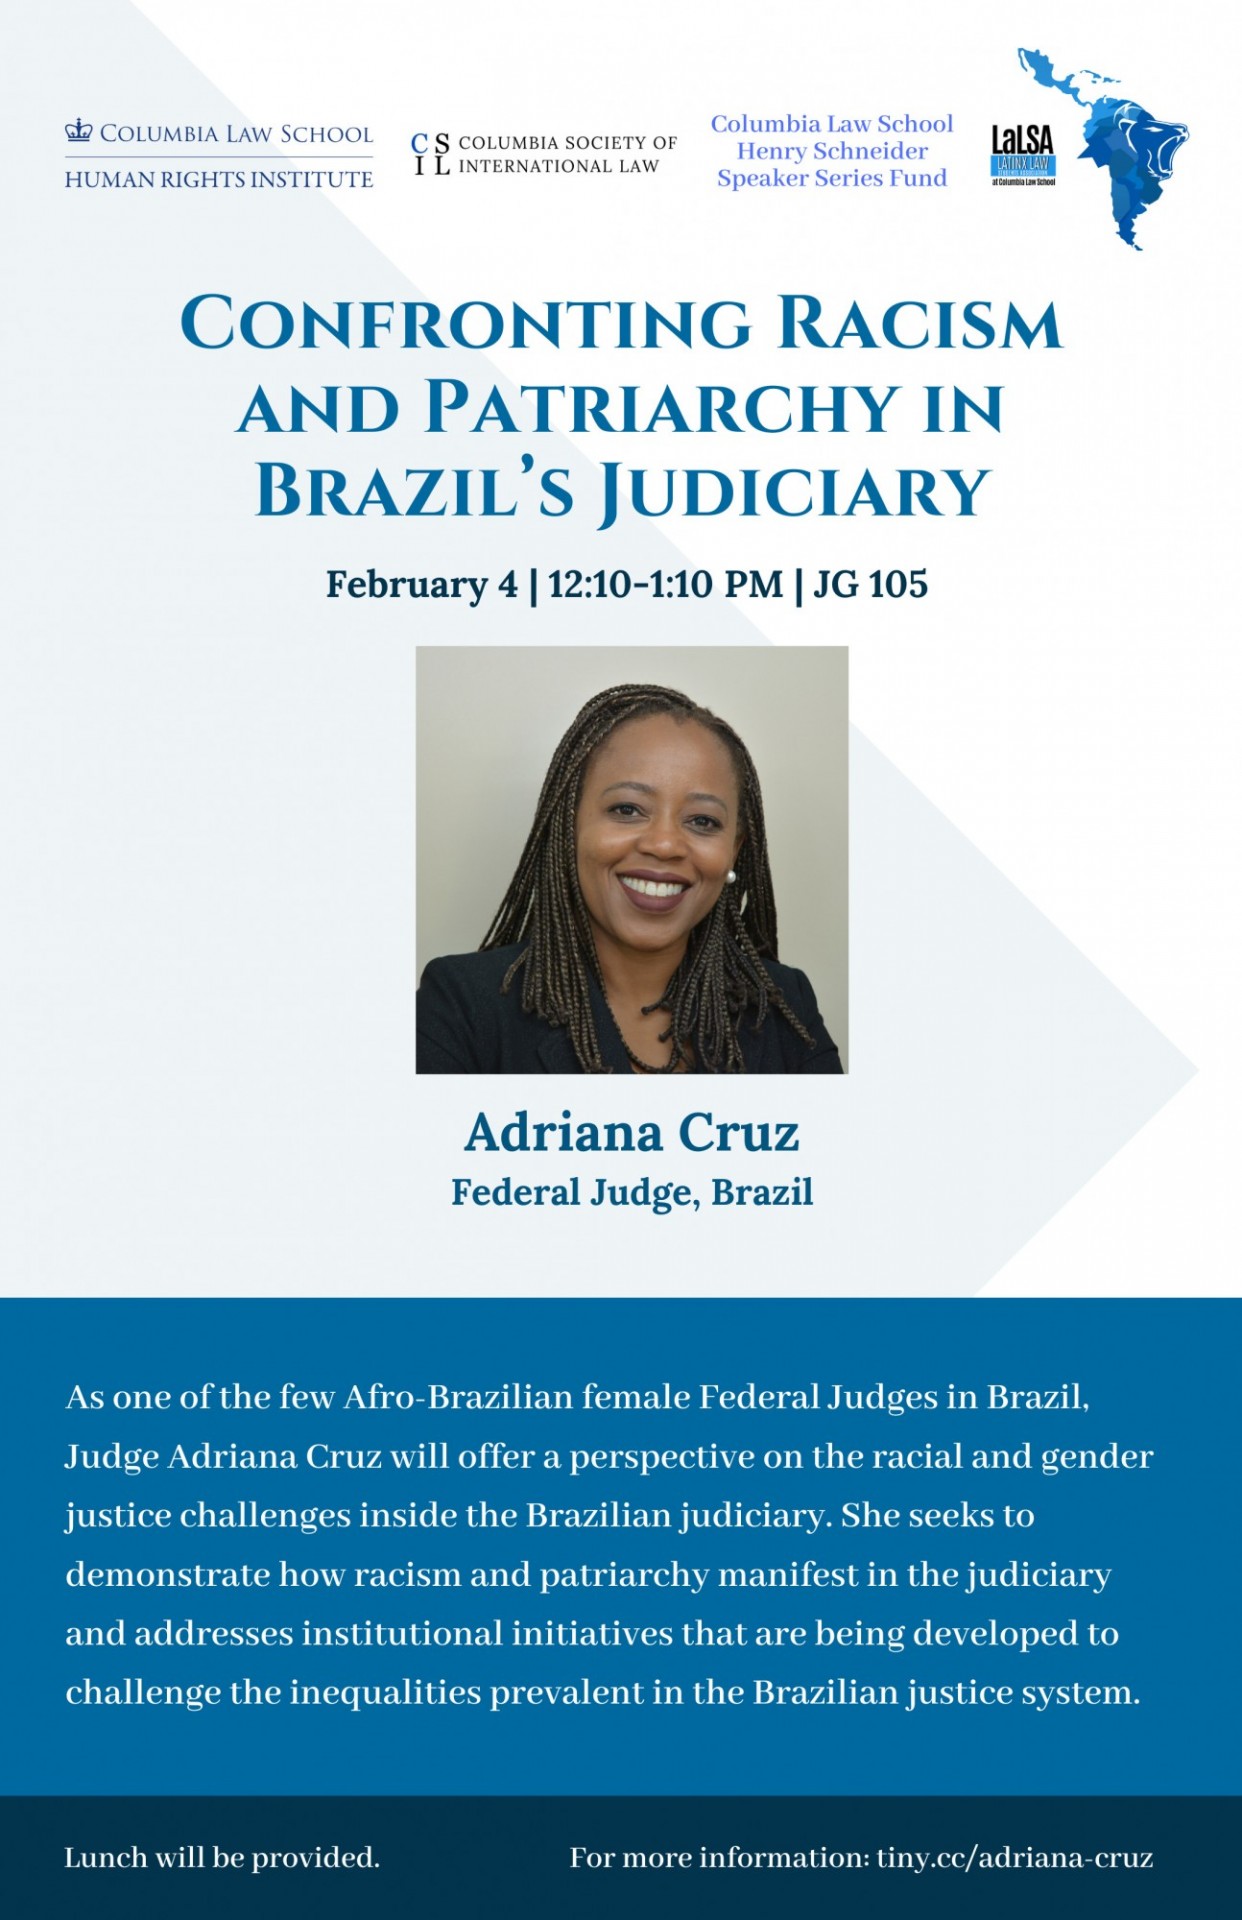 Confronting Racism and Patriarchy in Brazil’s Judiciary: A Conversation with Judge Adriana Cruz